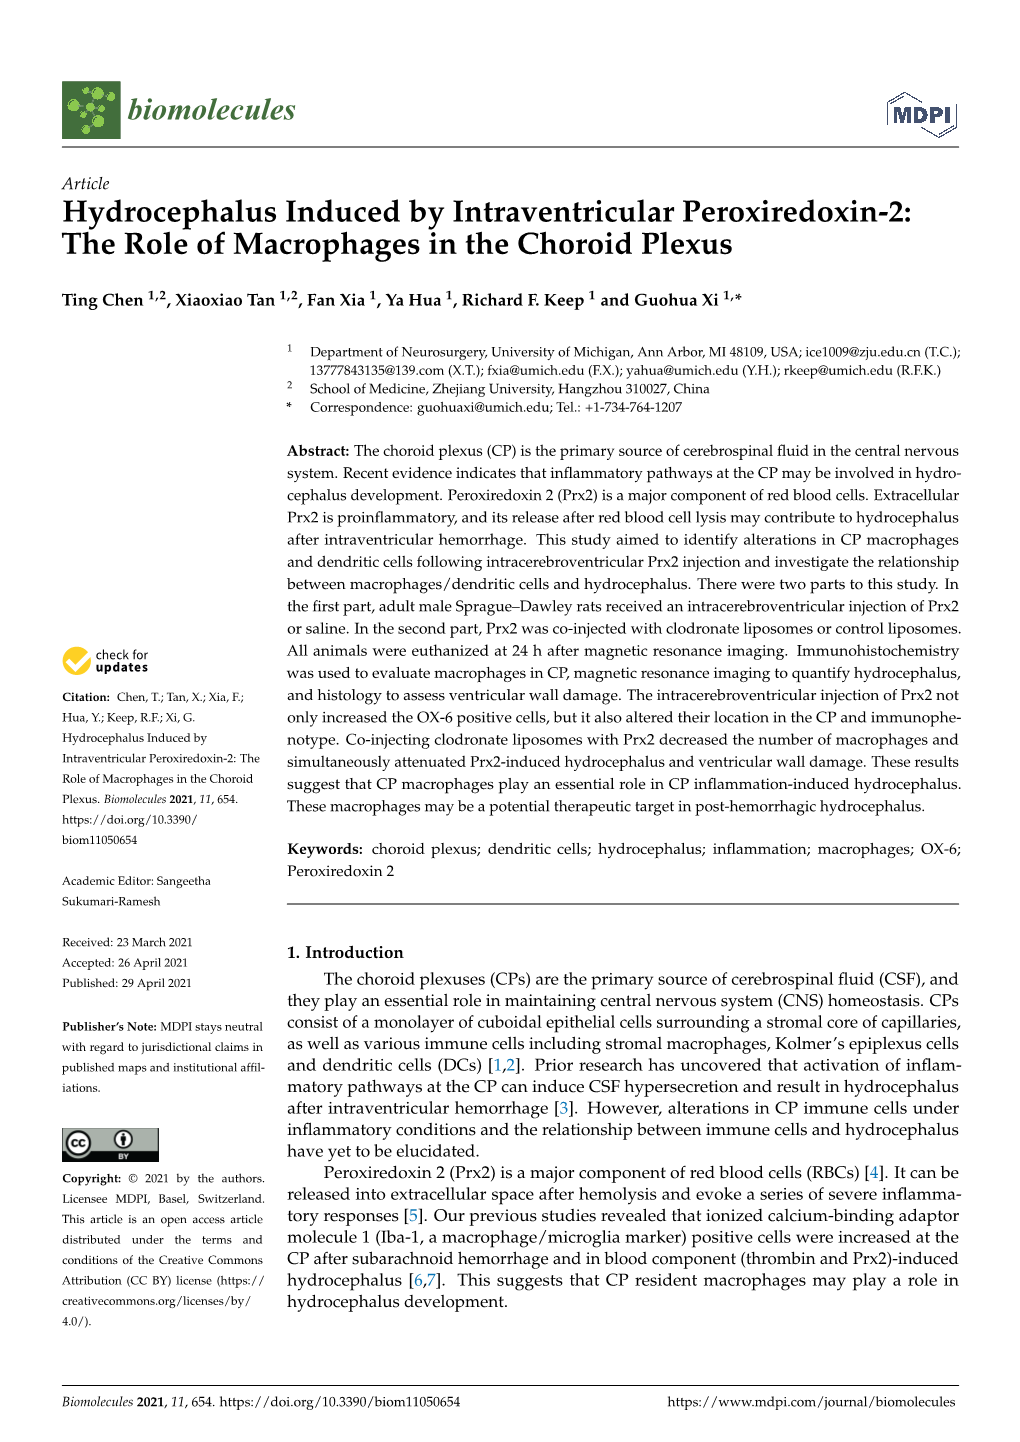 The Role of Macrophages in the Choroid Plexus